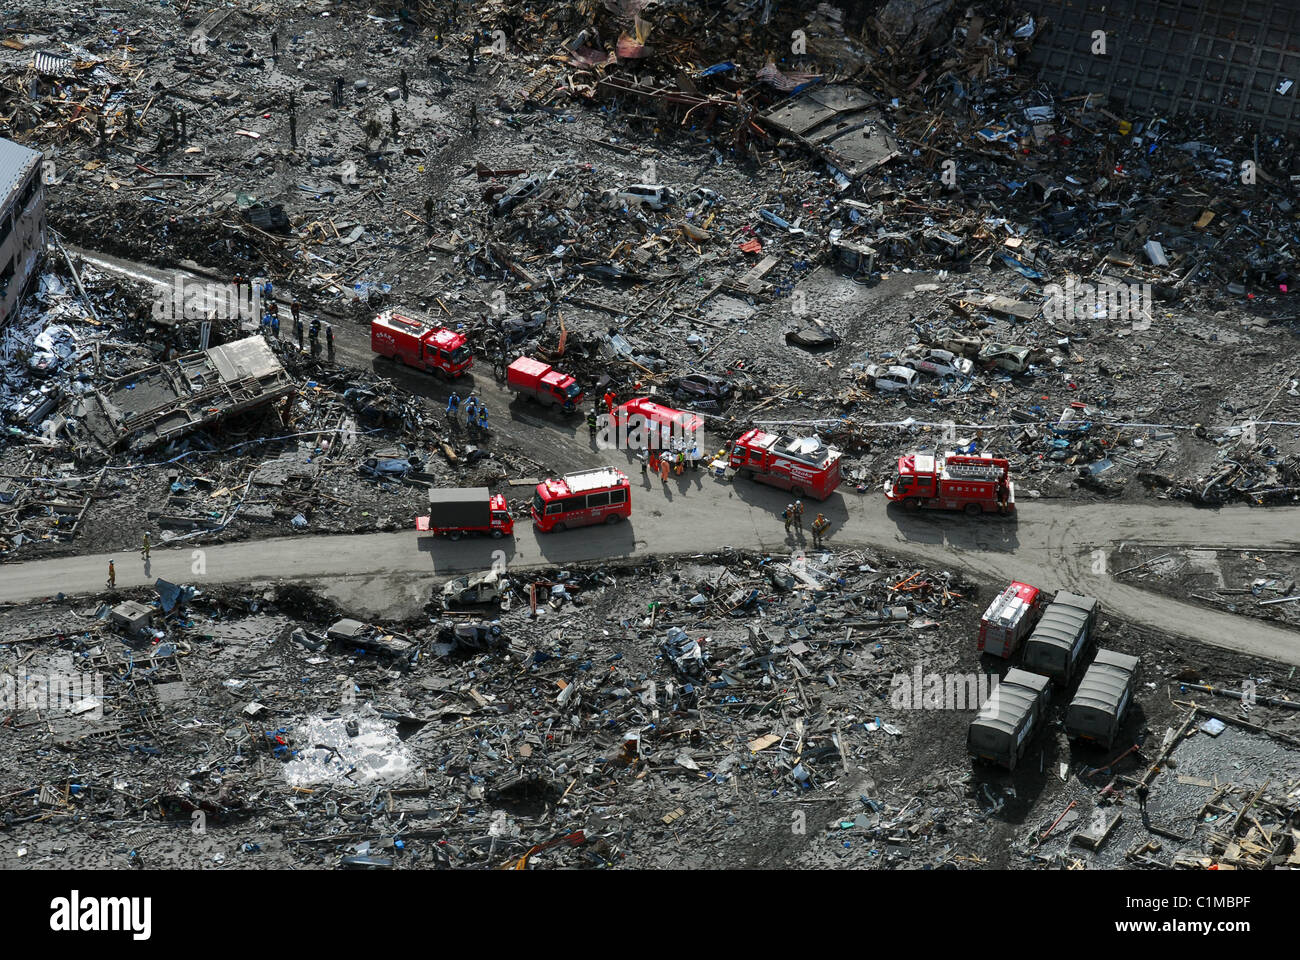 Aerial view of Sukuiso, Japan, showing emergency services amid the devastation caused by the earthquake + tsunami in March 2011. Stock Photo